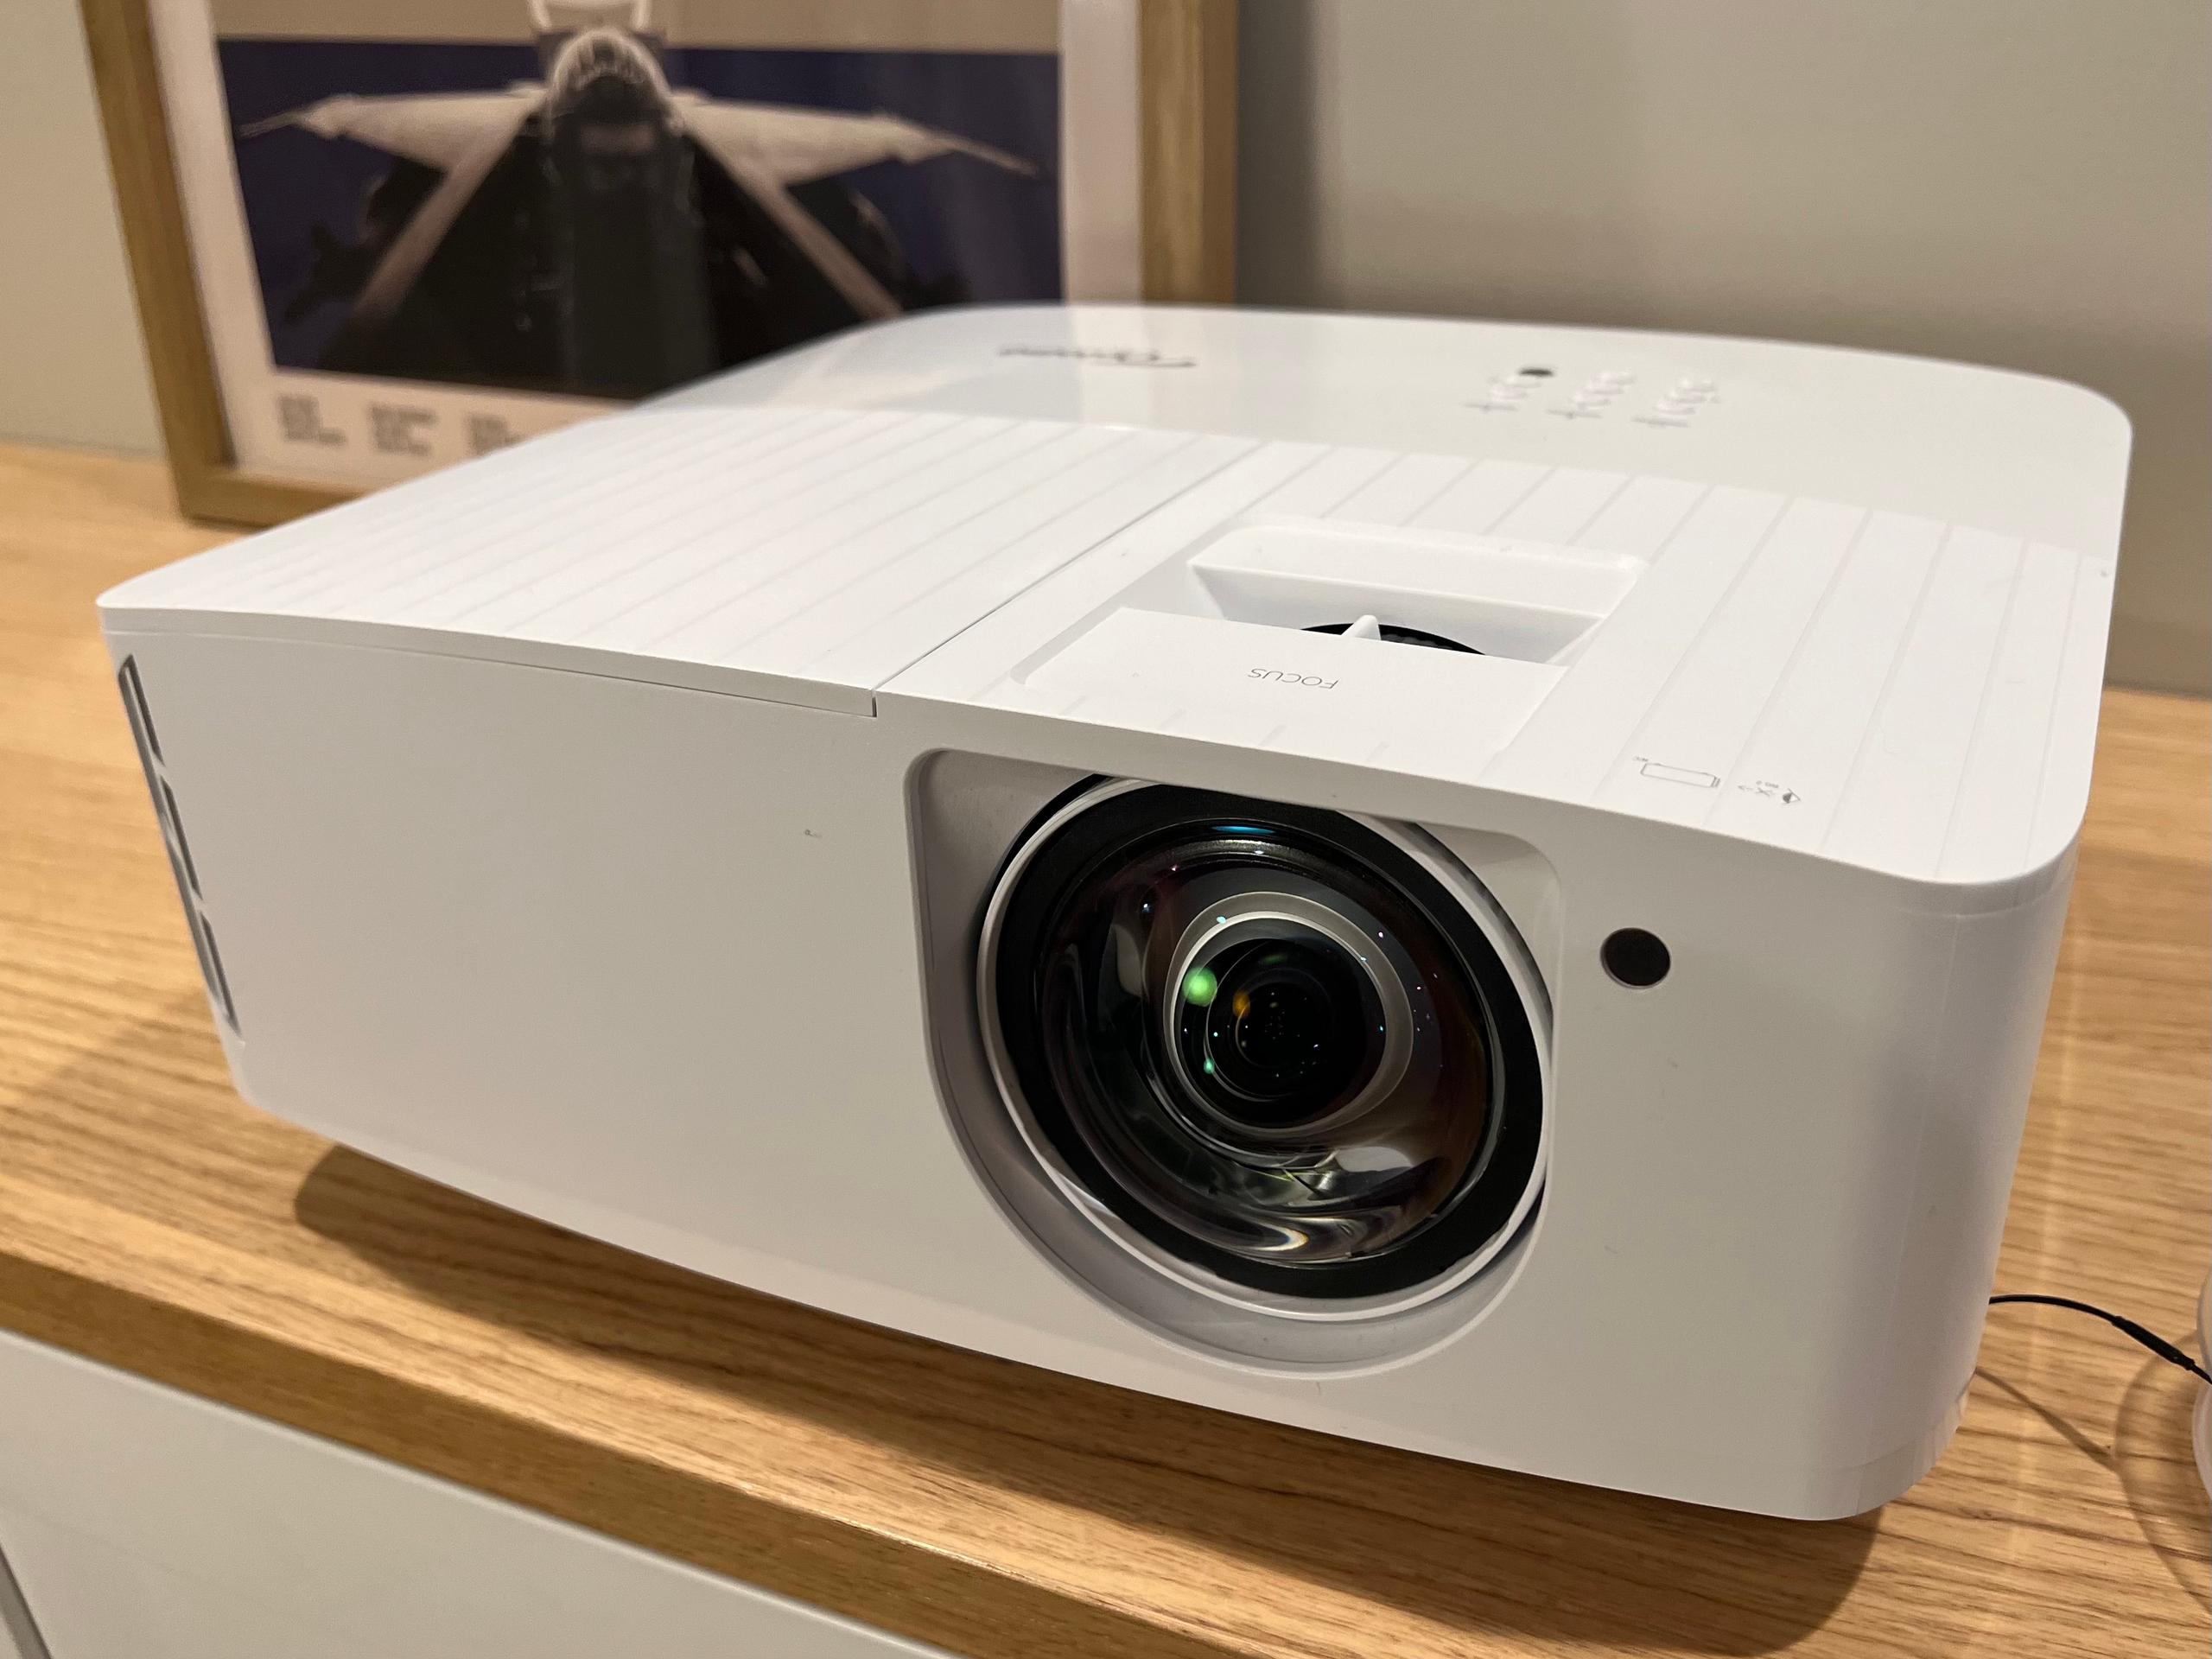 The Optoma UHD35stx 4K projector is shown from the right on a table.